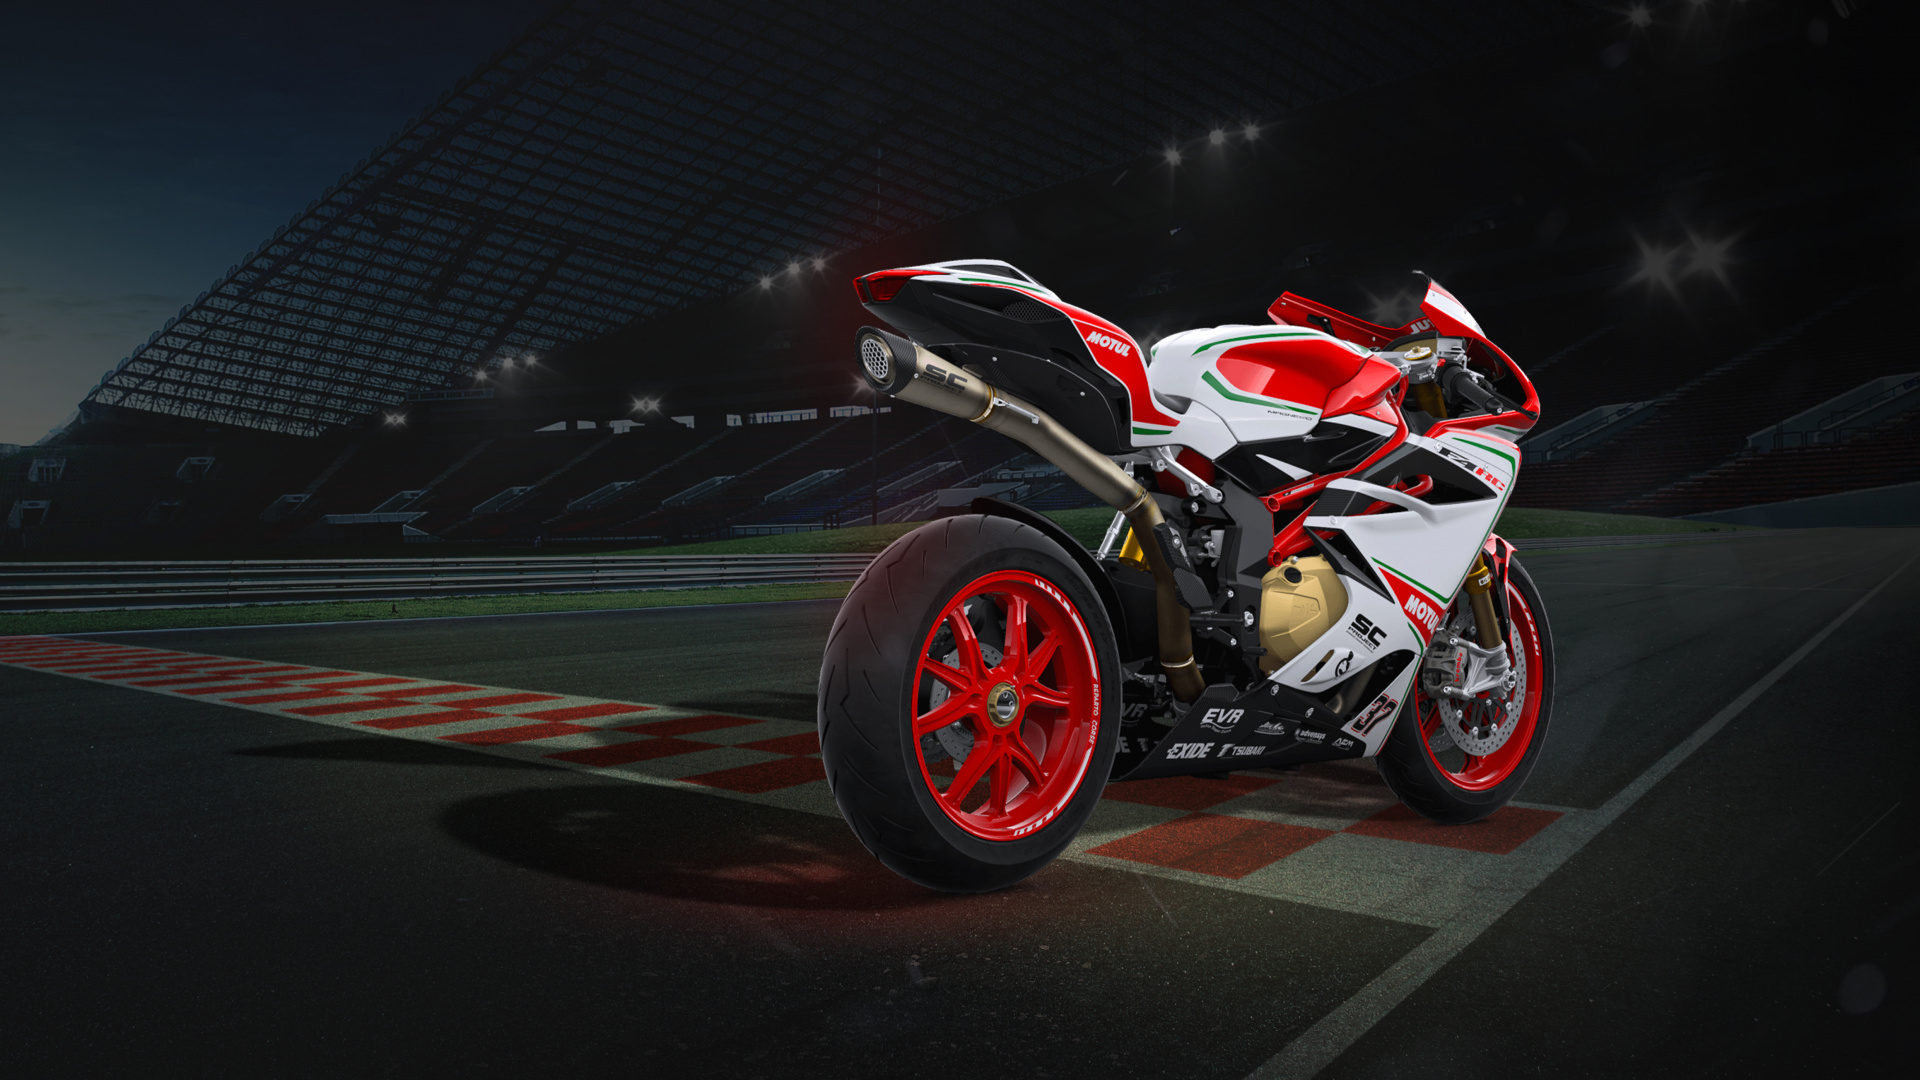 Red and White Sports Bike on Track Field. Wallpaper in 1920x1080 Resolution